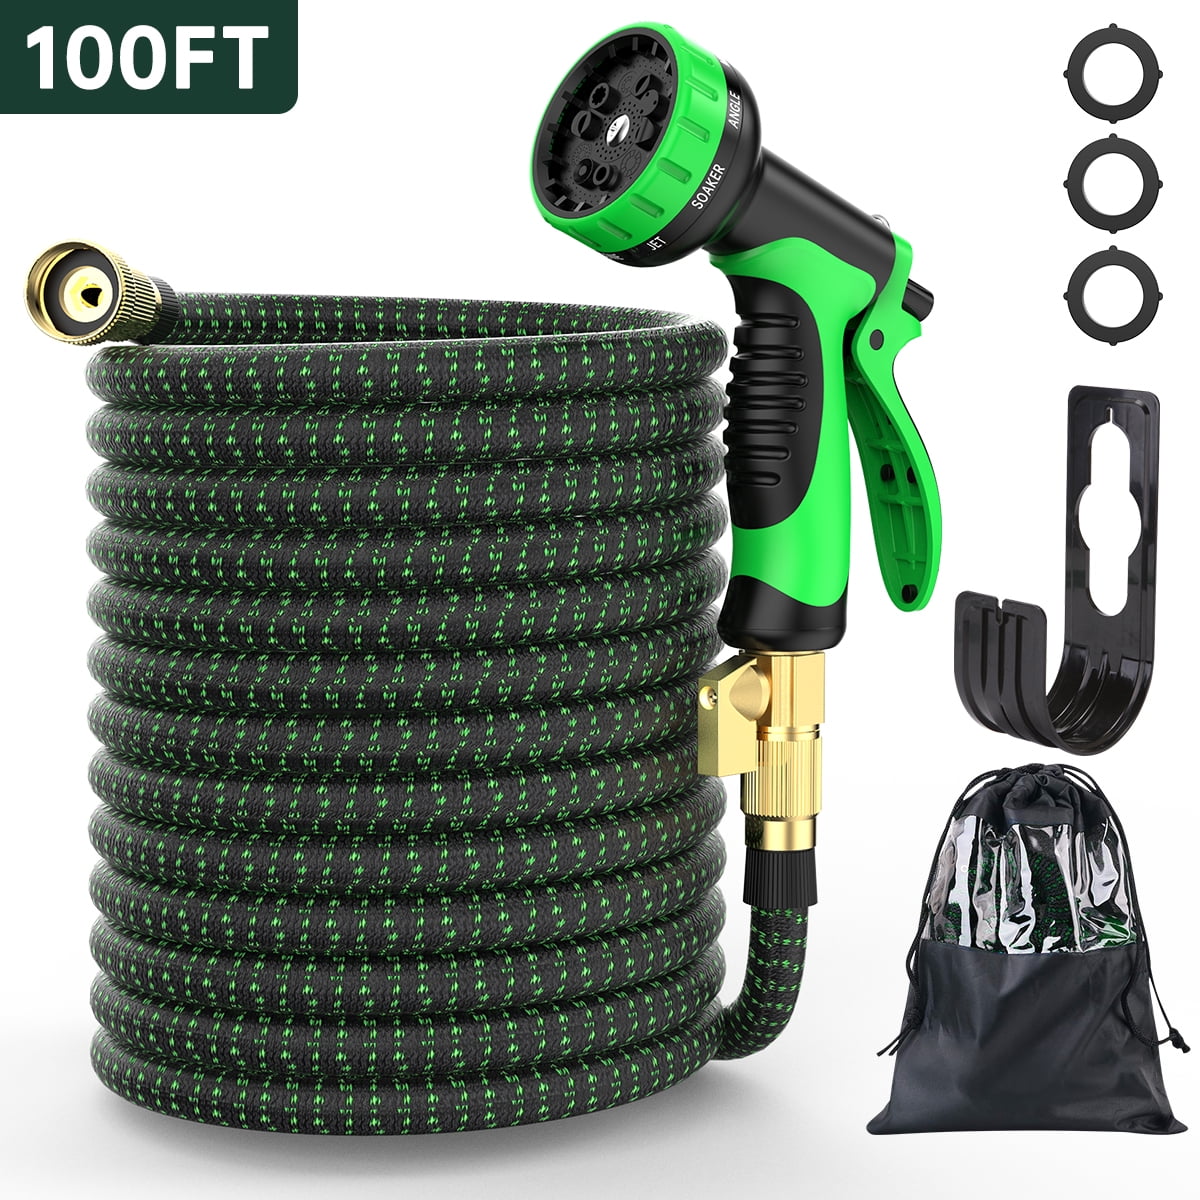 25FT/100FT Expandable Garden Hose Multifunctional Nozzle Lightweight Water Hose 